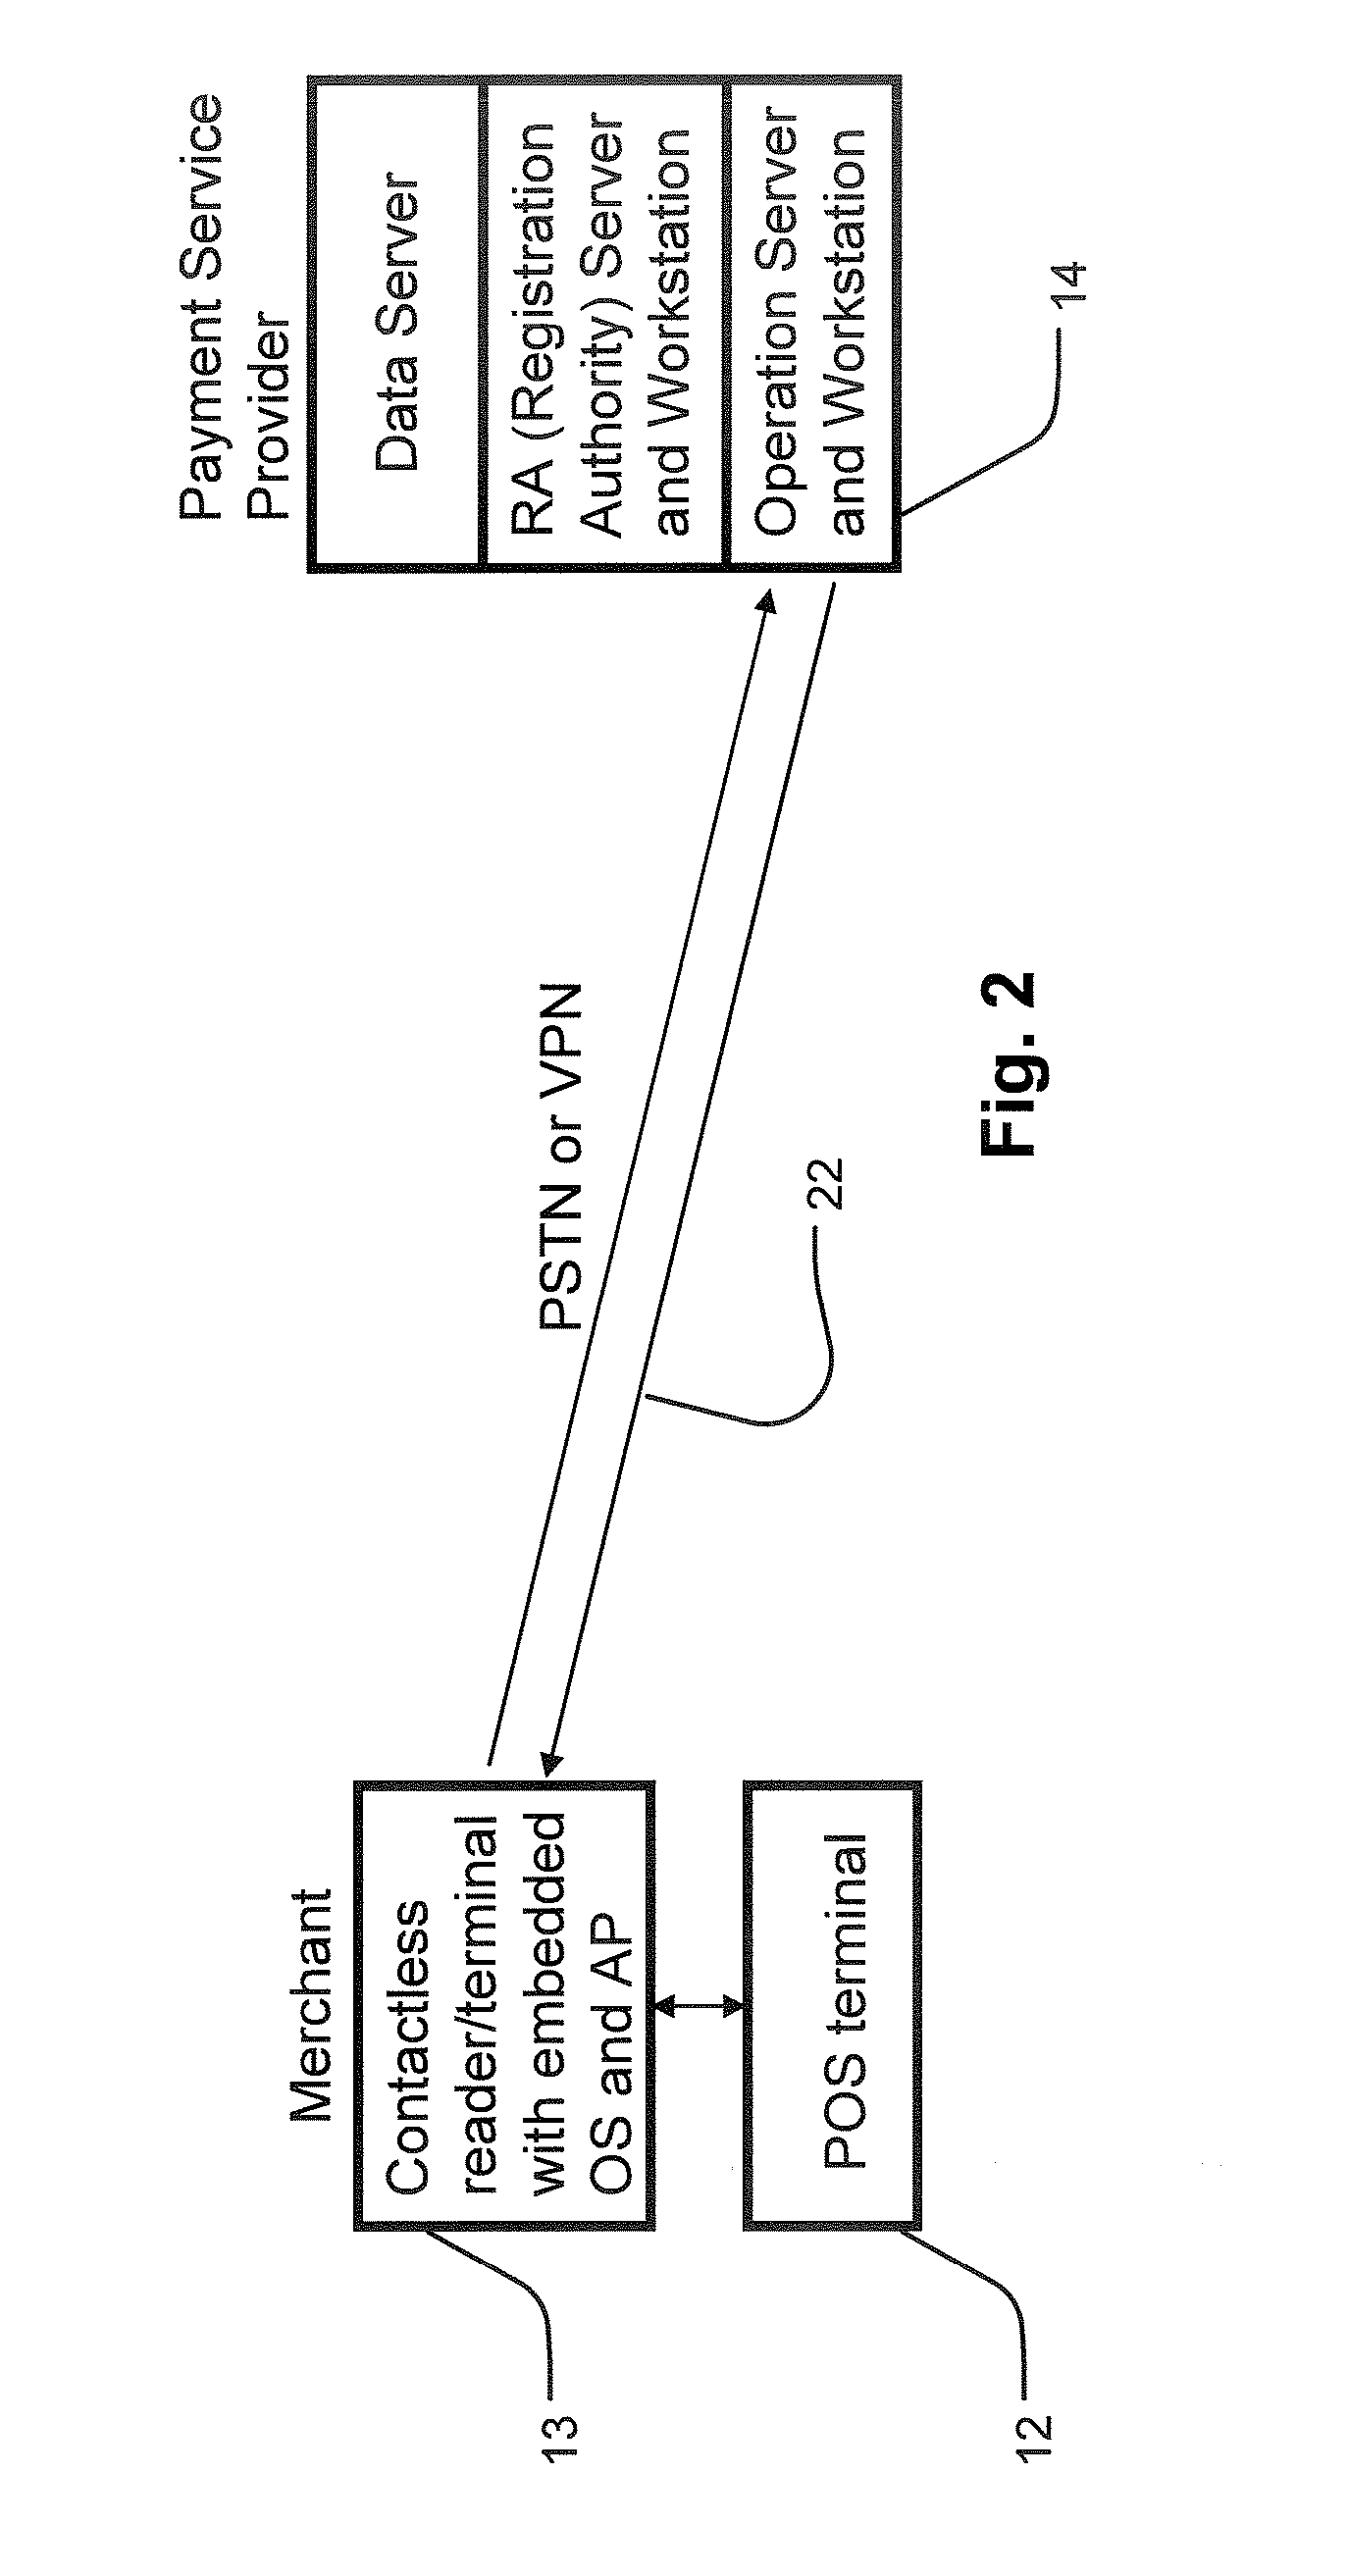 System and Method of Managing Contactless Payment Transactions Using a Mobile Communication Device As A Stored Value Device